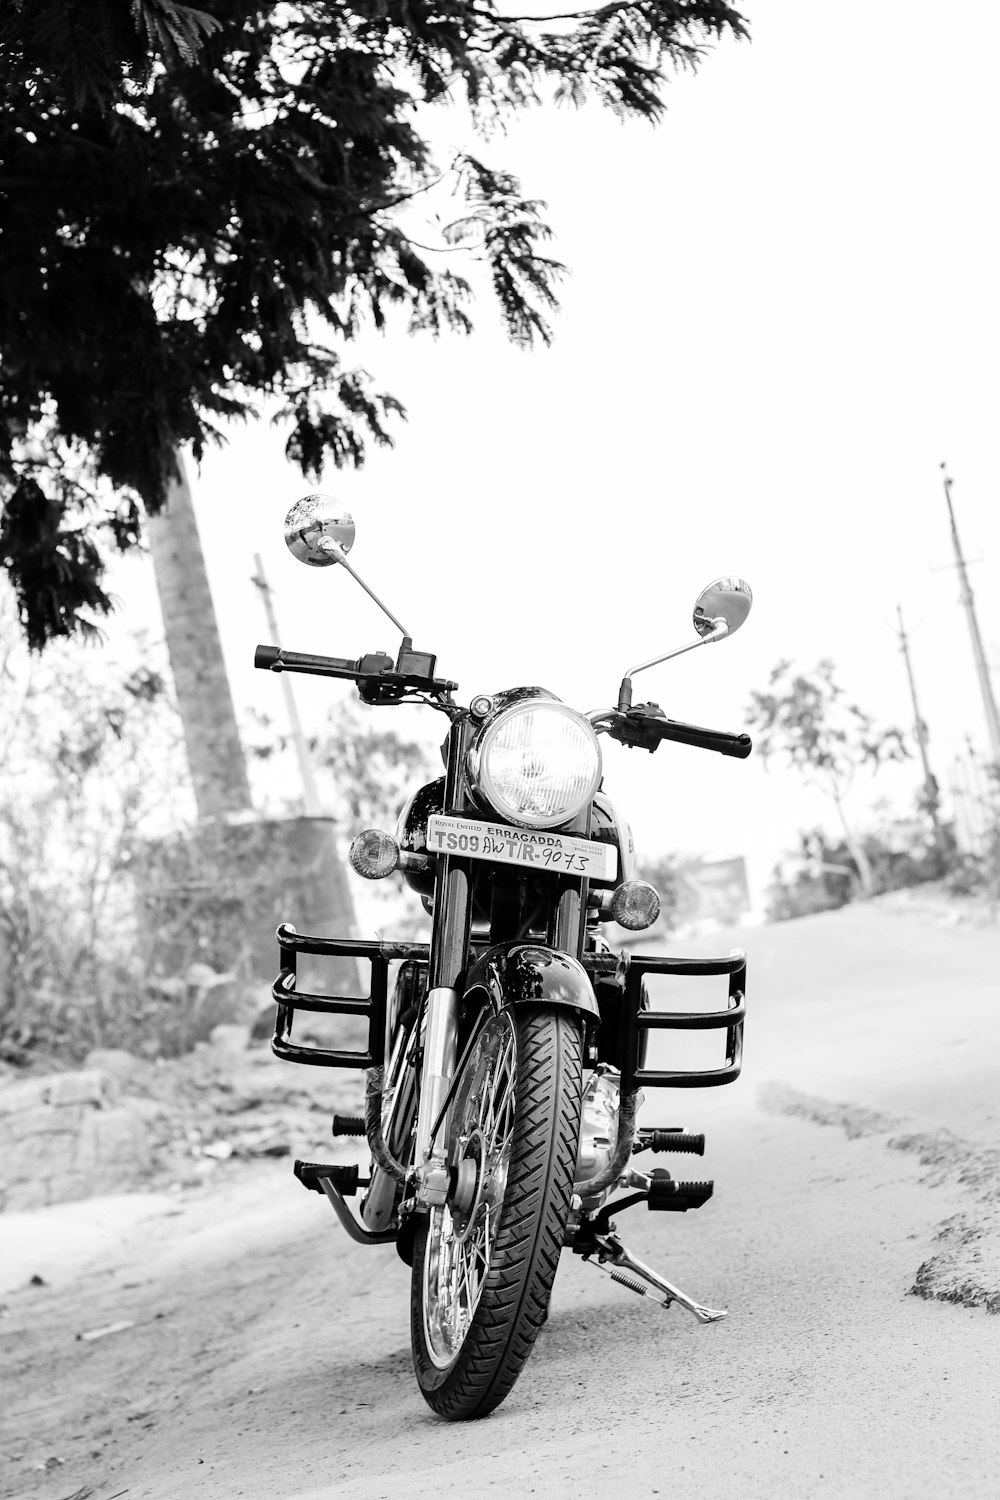 grayscale photo of motorcycle parked on road